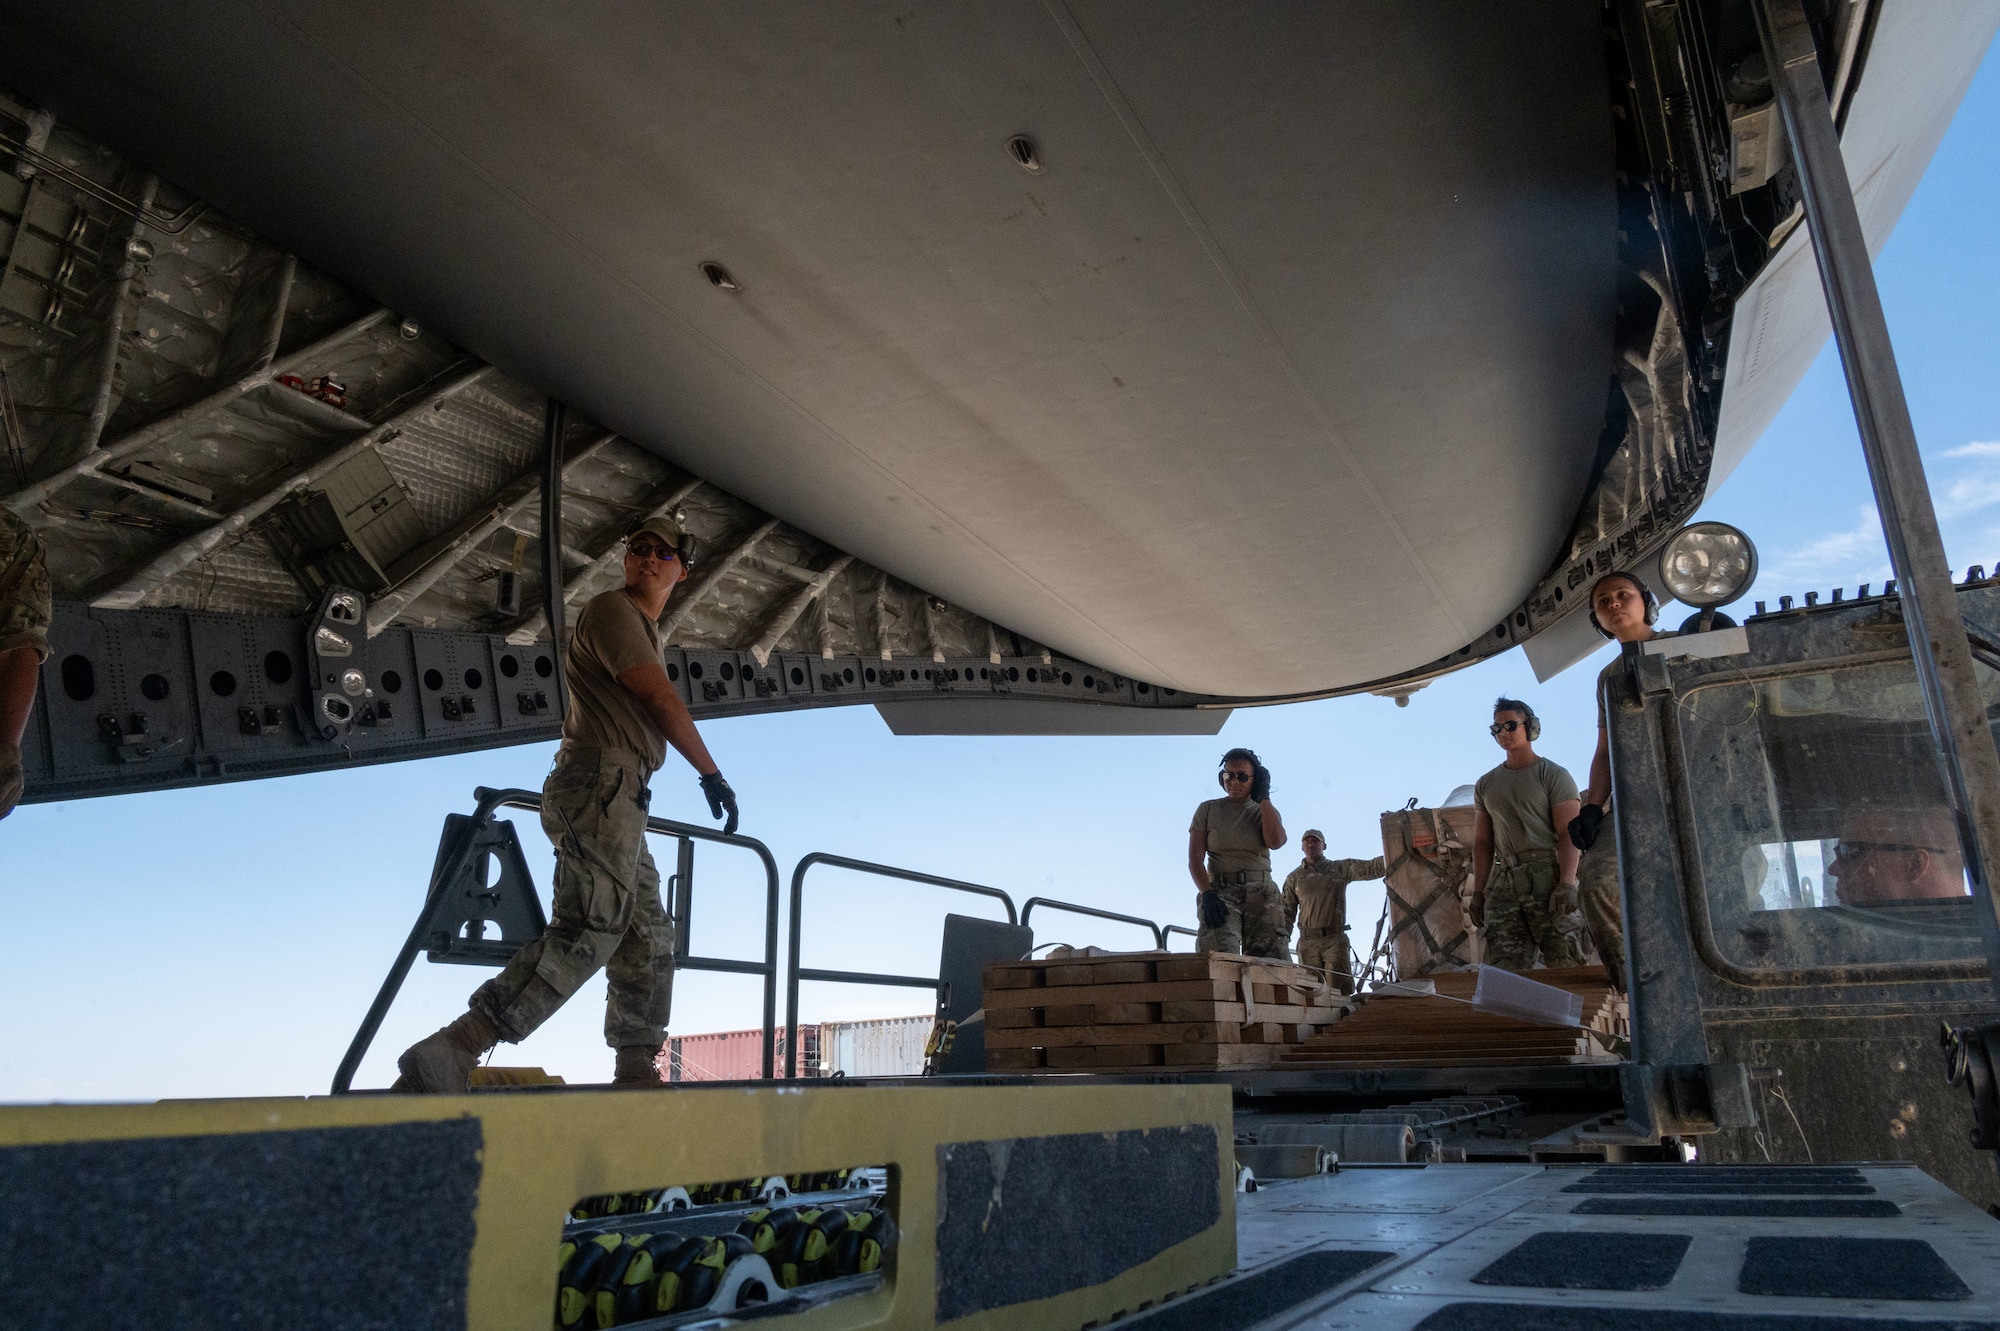 332d Expeditionary Logistics Readiness Squadron Aerial Port Airmen prepare to load cargo into a C-17 Globemaster III aircraft at an undisclosed location in Southwest Asia, May 7, 2022. Working in concert to coordinate movement of aircraft, passengers, equipment, and everything else requiring air travel, the 332d ELRS’s Aerial Port enables the 332d Air Expeditionary Wing to continue to provide regional security throughout its area of responsibility.